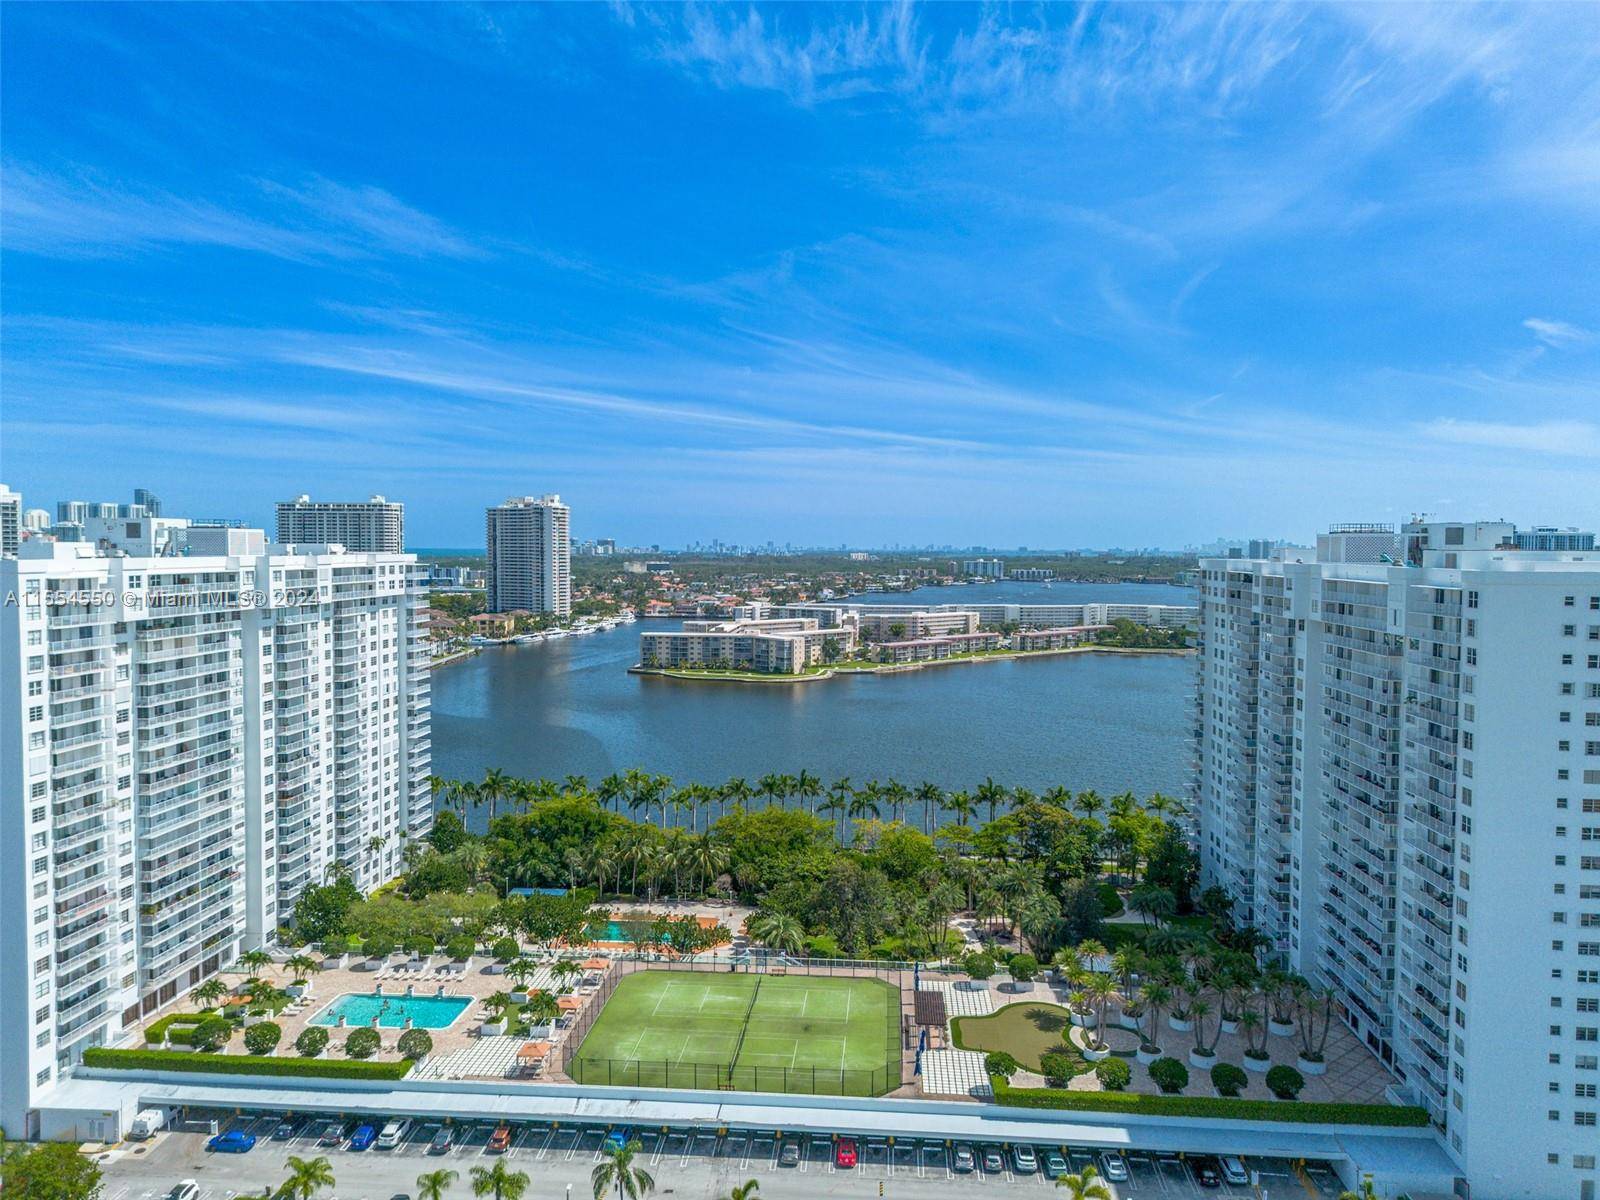 Experience luxury living in this renovated 2 2 condo in Aventura with stunning views of the Intracoastal.